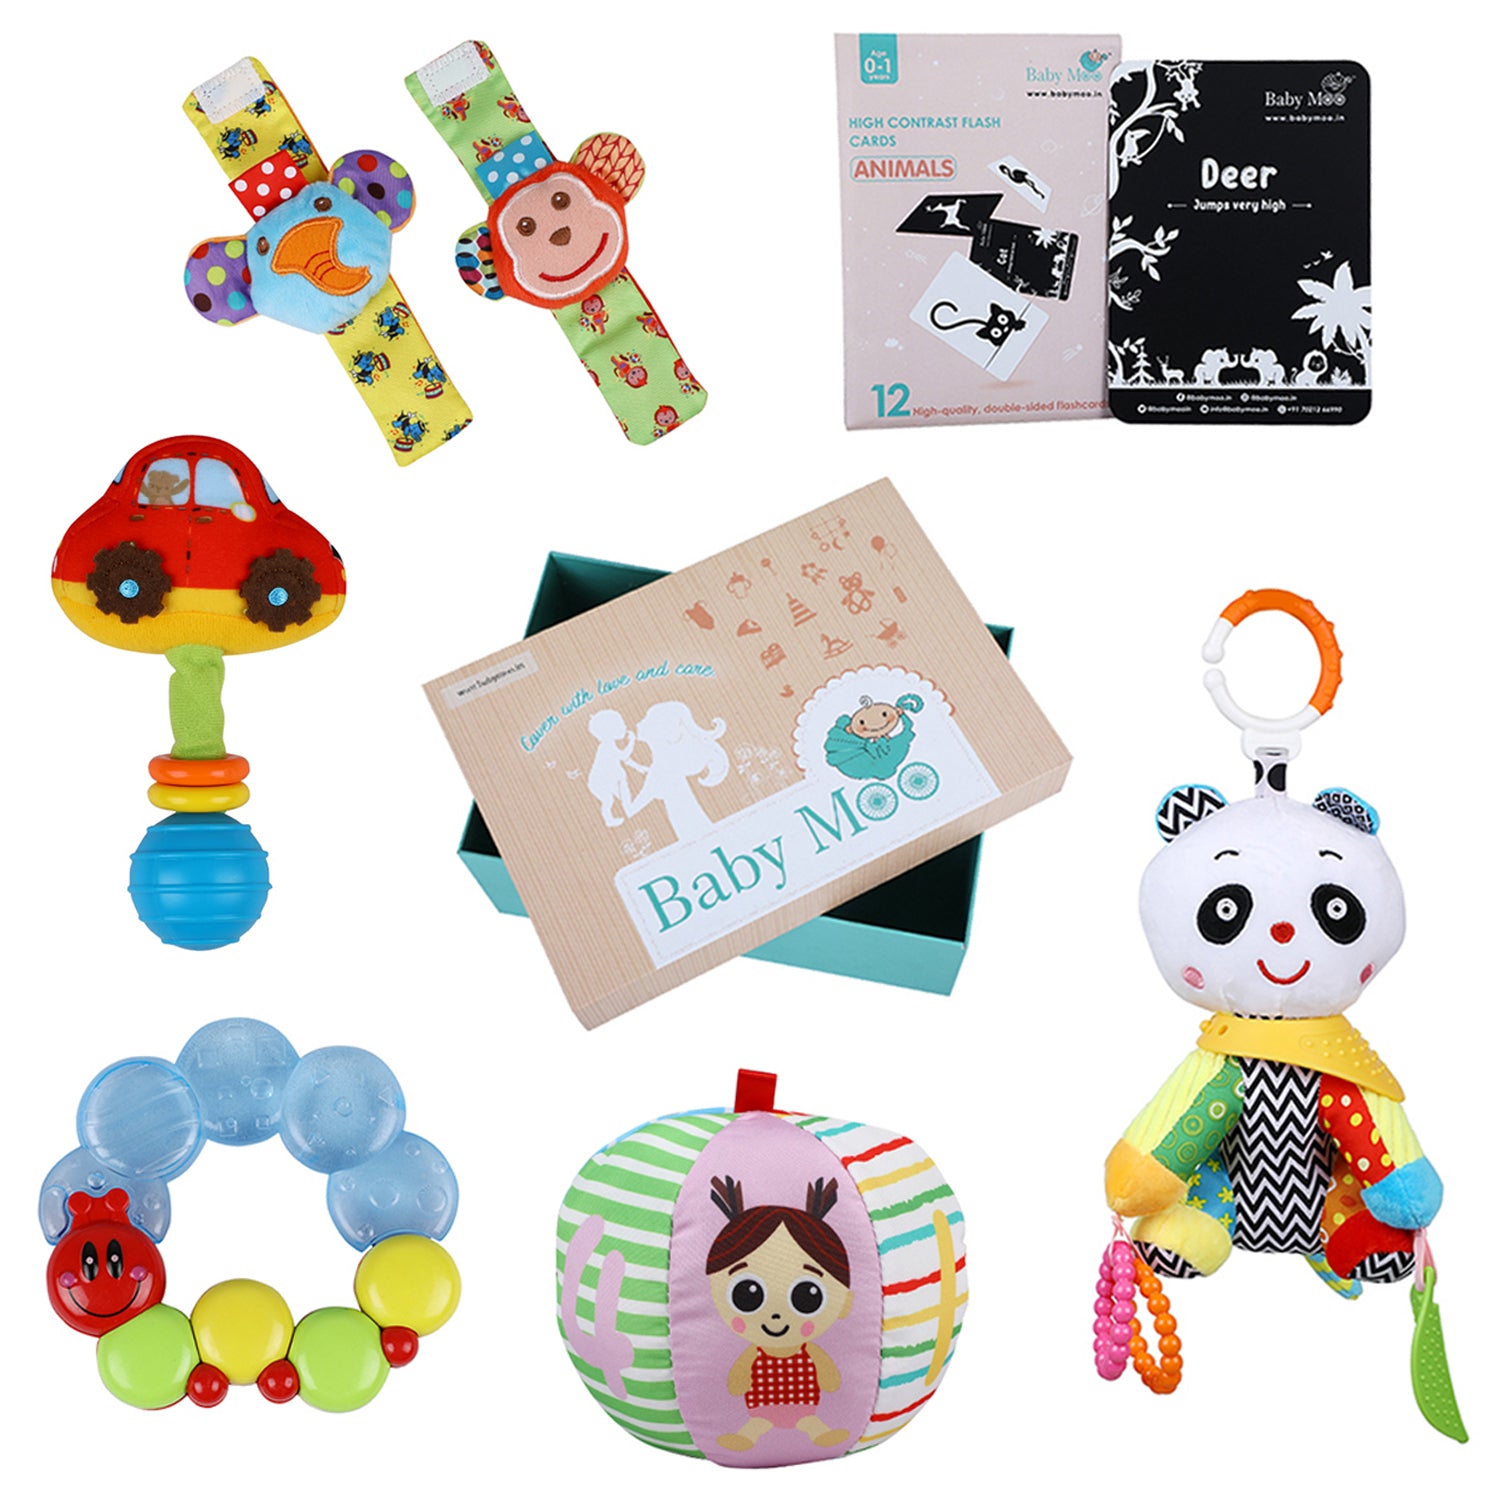 Newborn Play Kit With High Contrast Cards, Toy Rattles And Teethers 6 Items 0-12M - Multicolour - Baby Moo